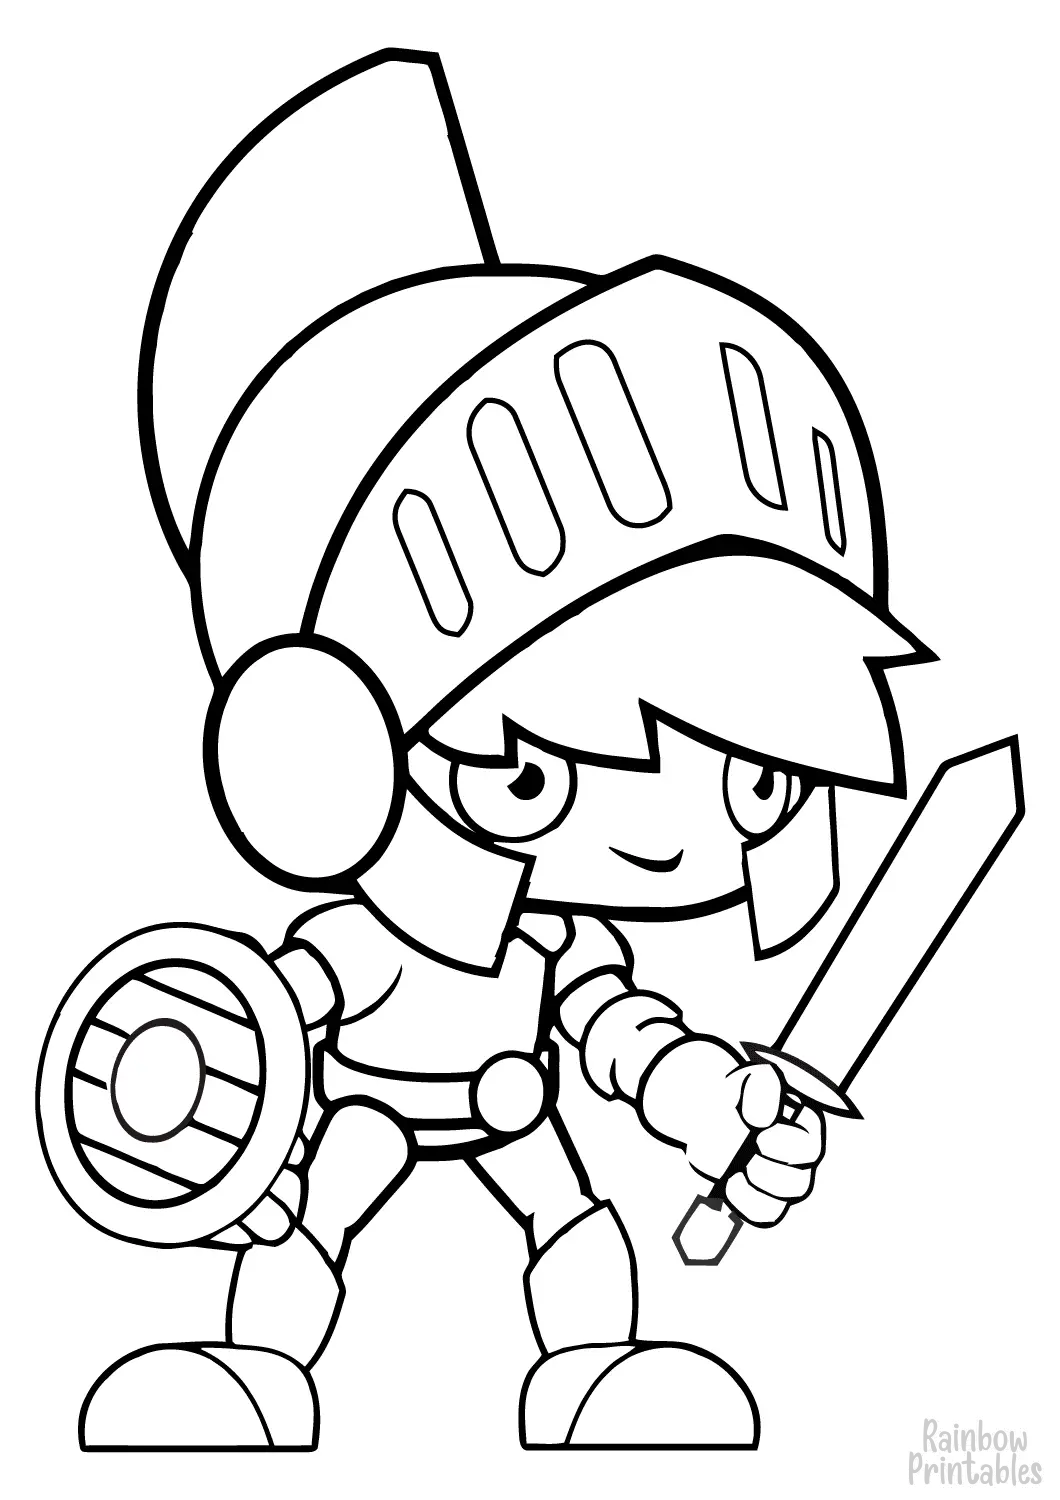 CARTOON ROmaN SOLDIER Figure Free Clipart Coloring Pages for Kids Adults Art Activities Line Art